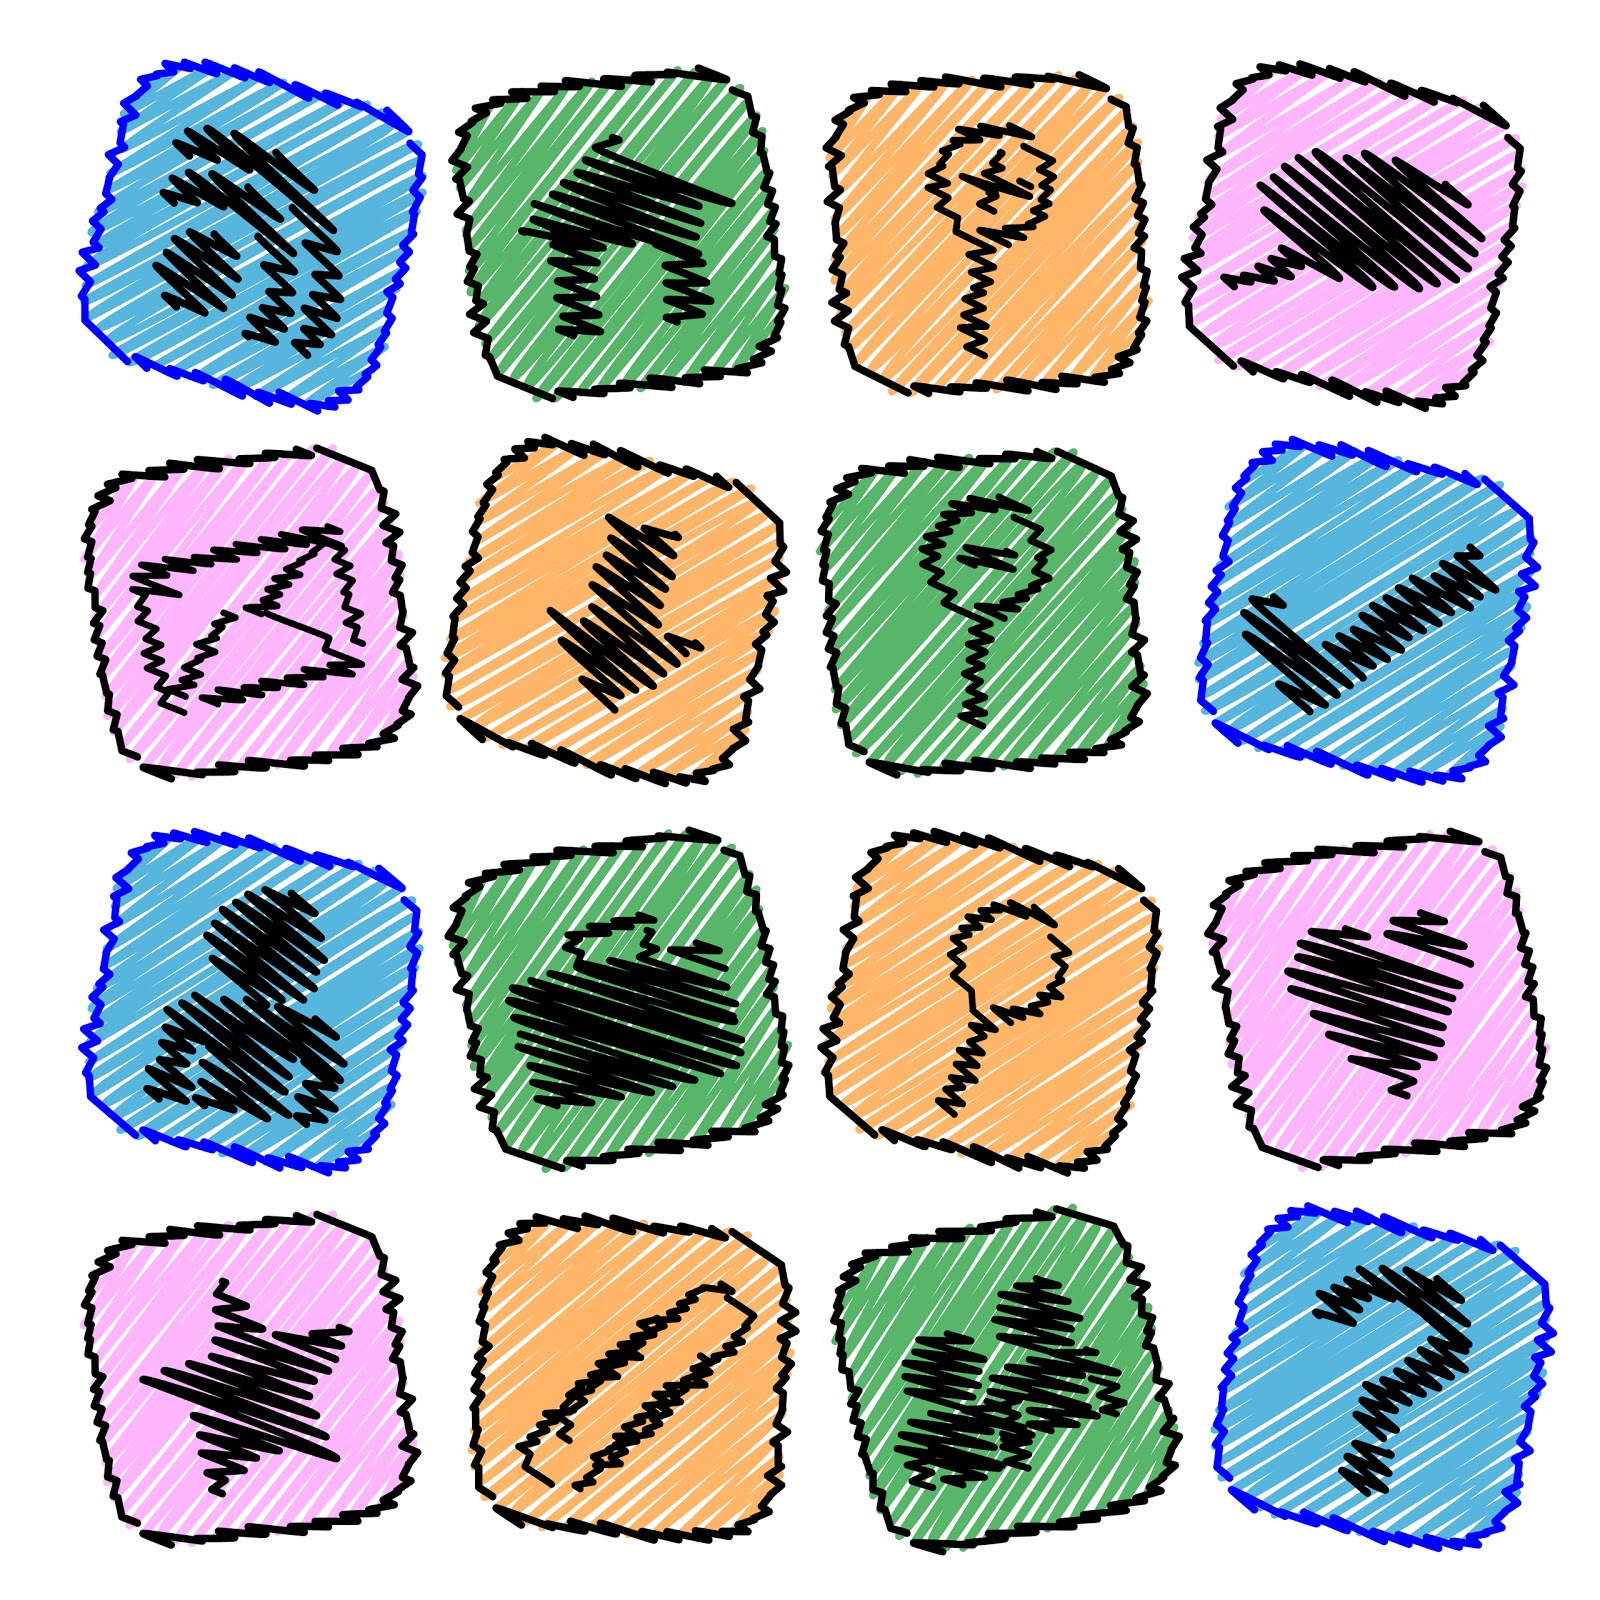 Cool vector sketch icons